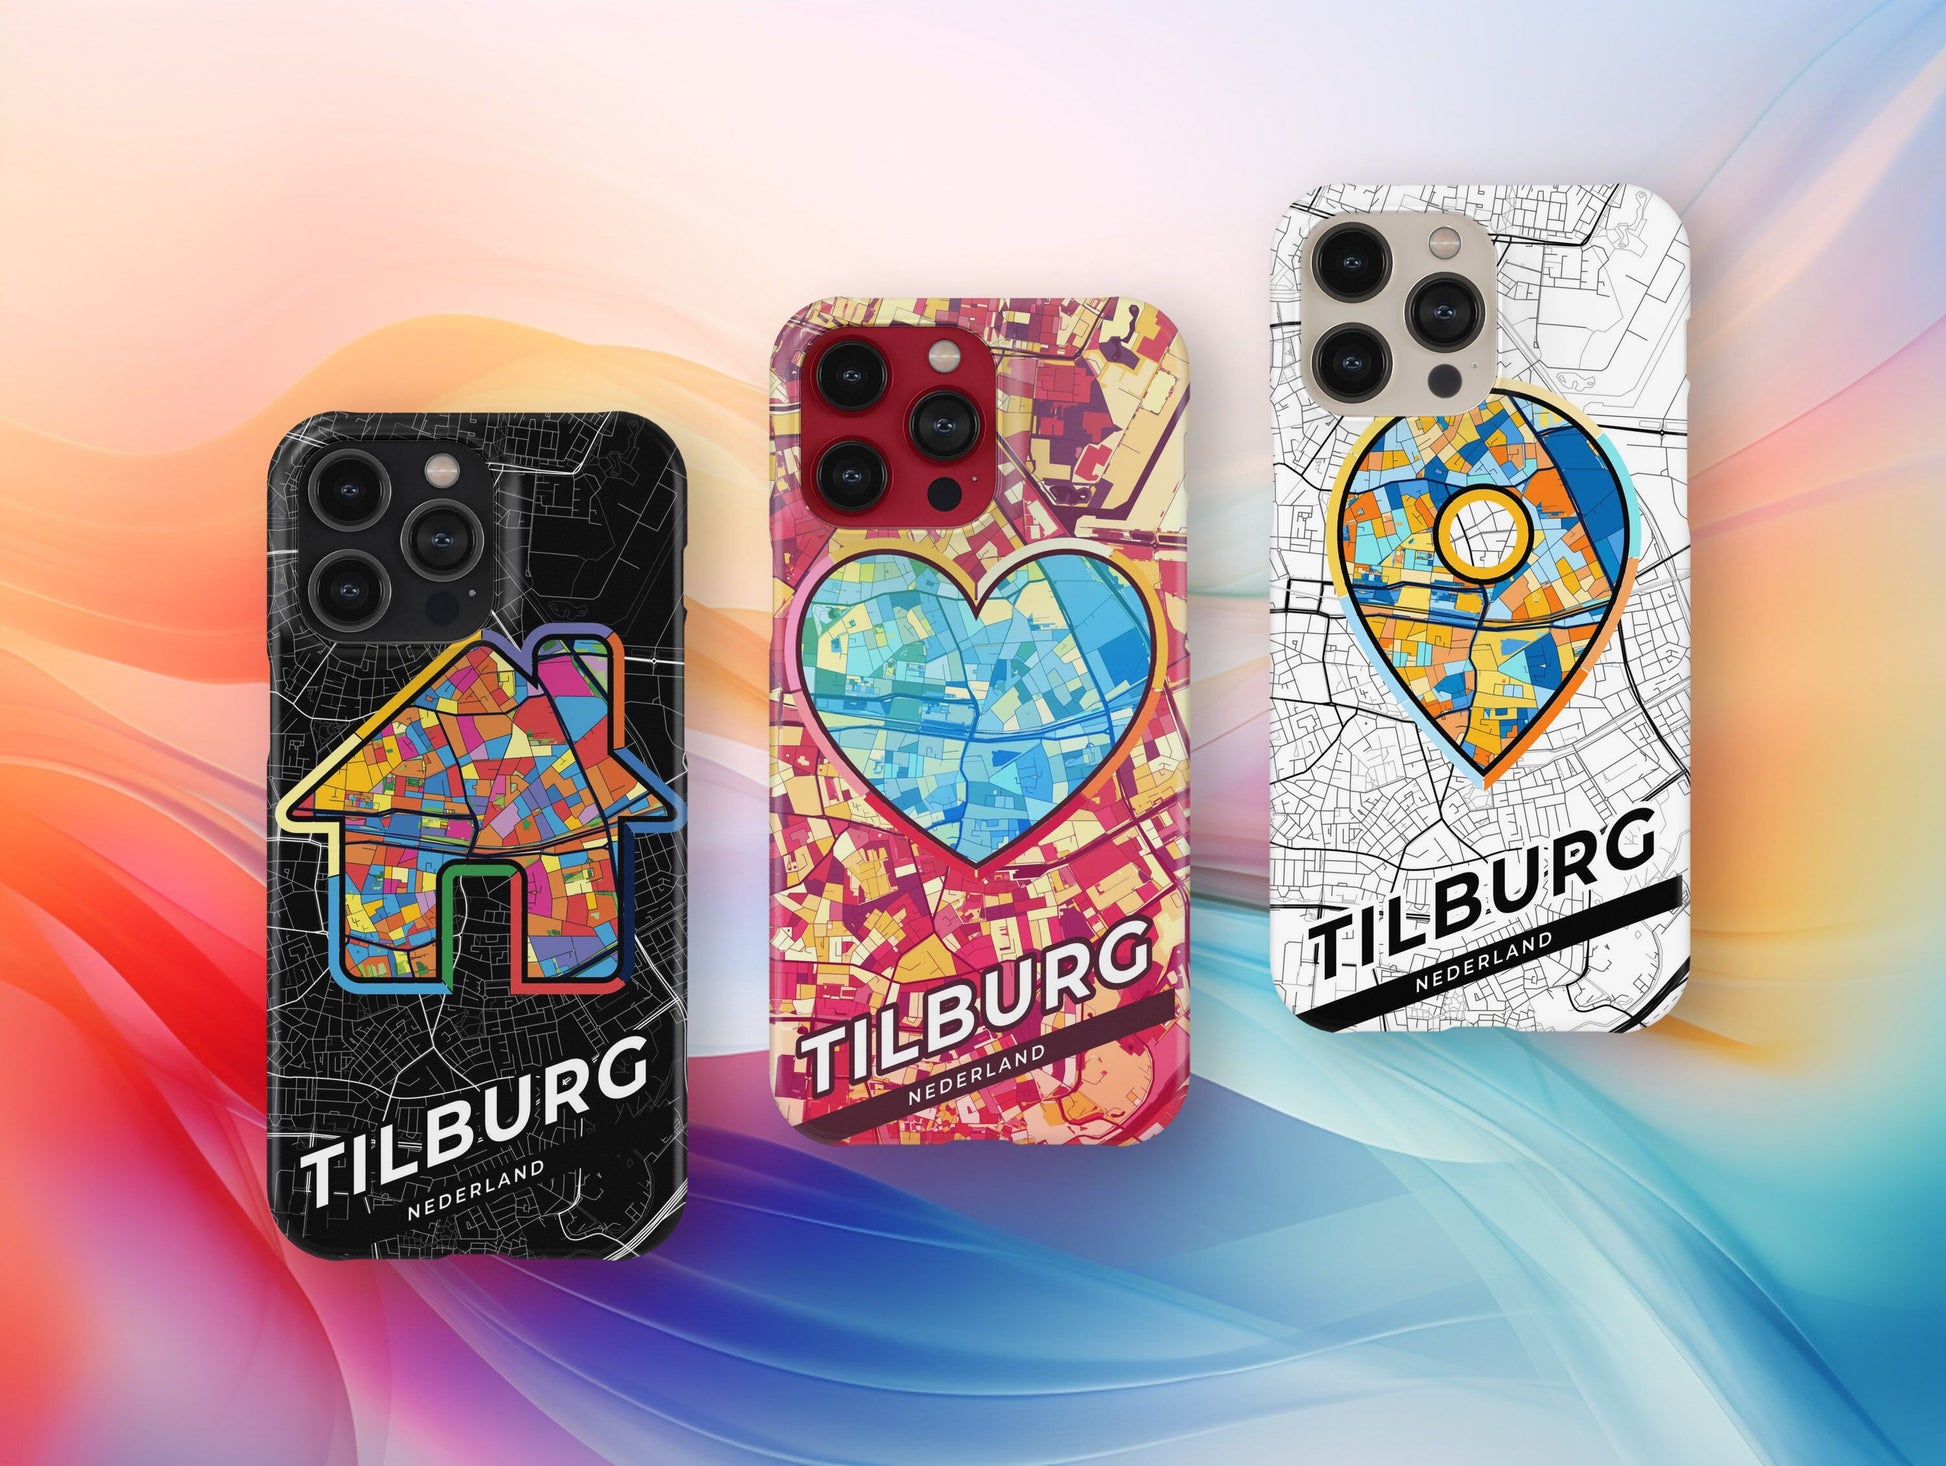 Tilburg Netherlands slim phone case with colorful icon. Birthday, wedding or housewarming gift. Couple match cases.